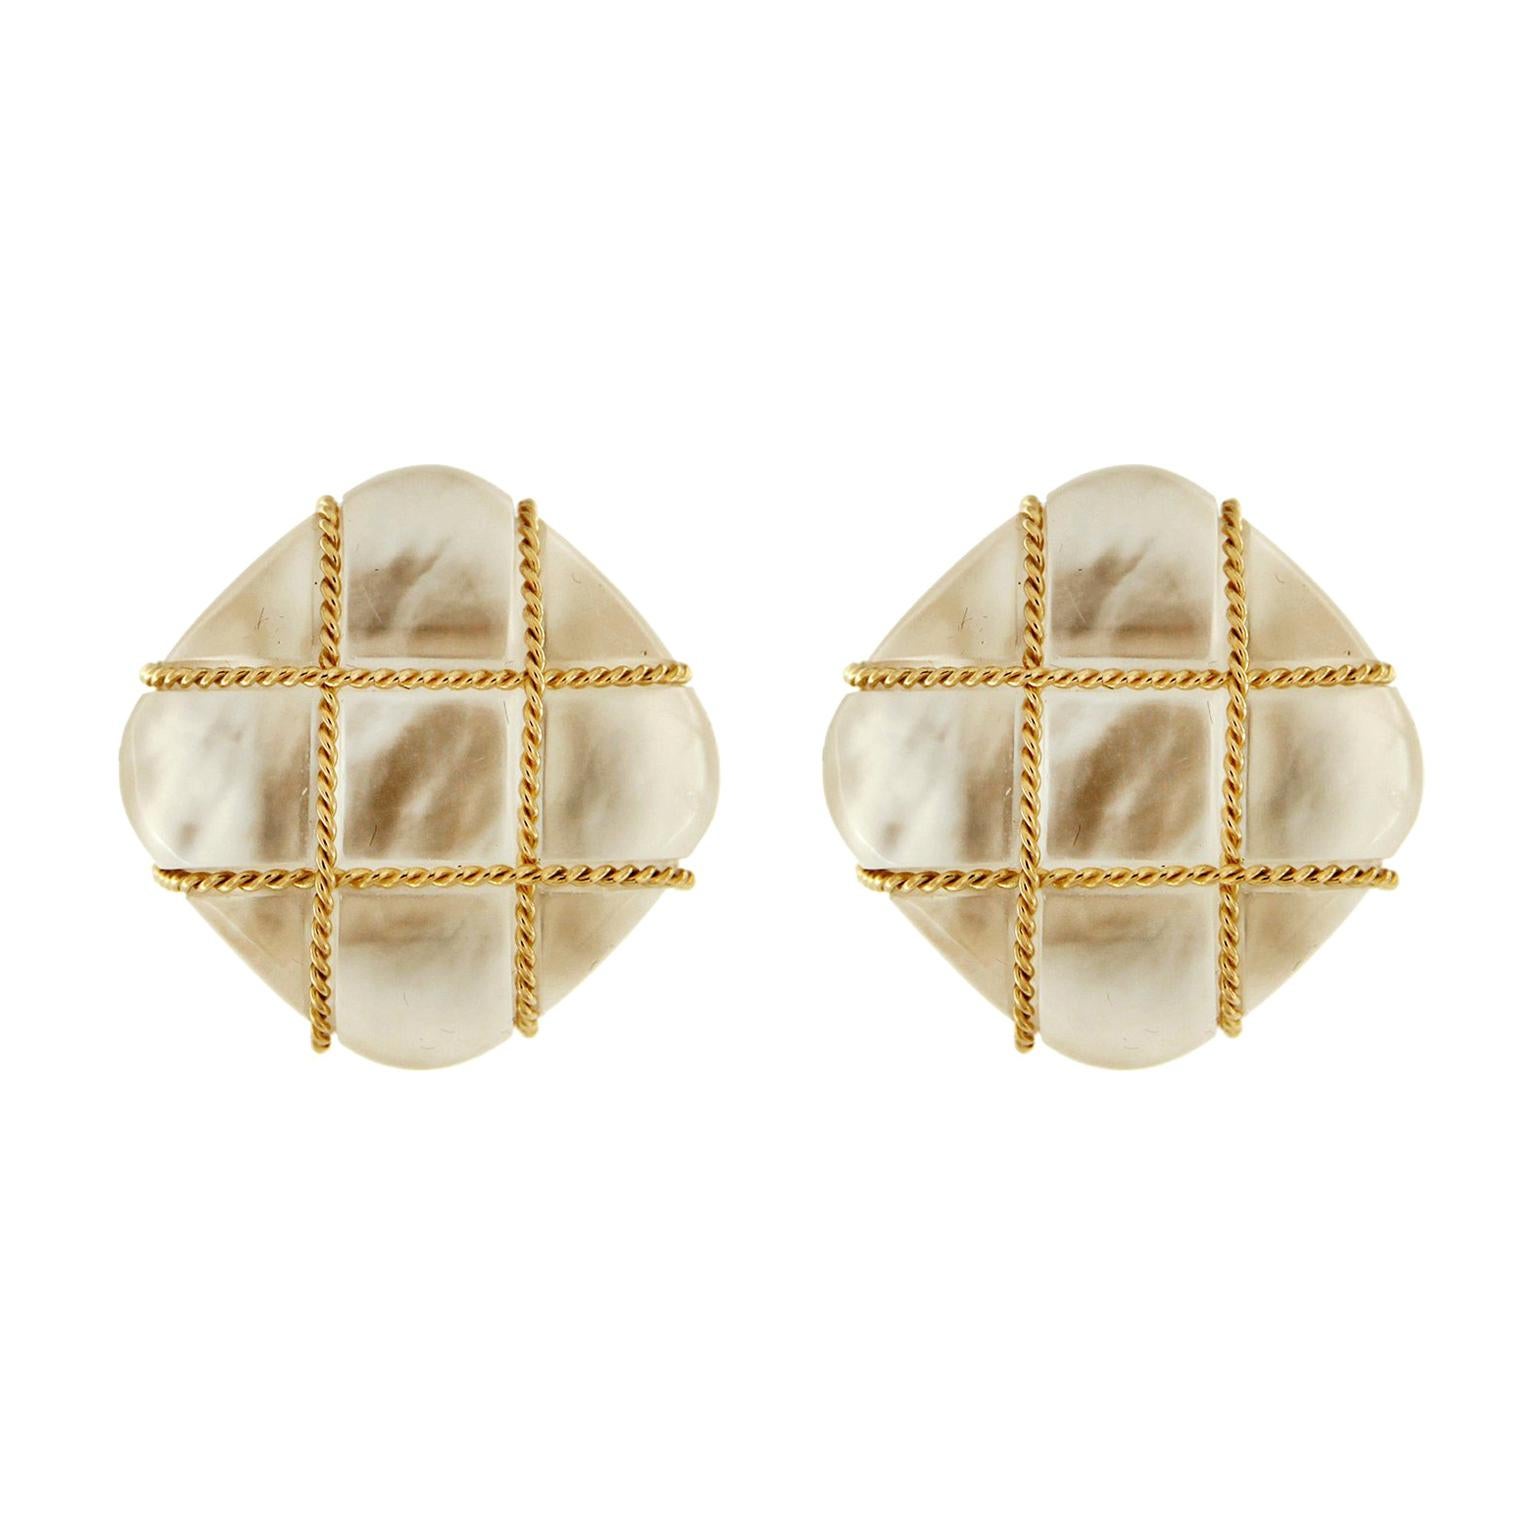 Valentin Magro Tic Tac Toe Crystal and Mother of Pearl Earrings